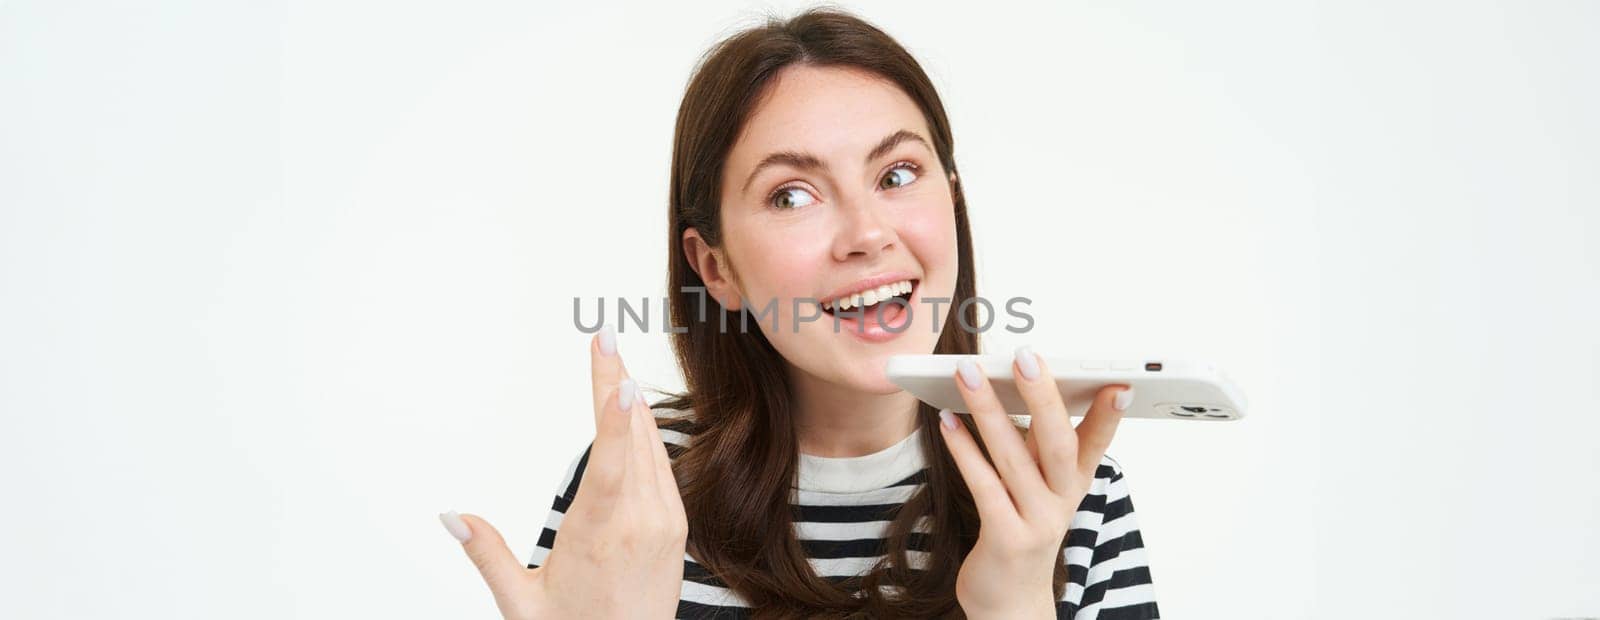 Image of cute brunette woman talking into speakerphone, holding mobile phone near mouth, records her voice, sends a voicemessage, using online translator app, white background.